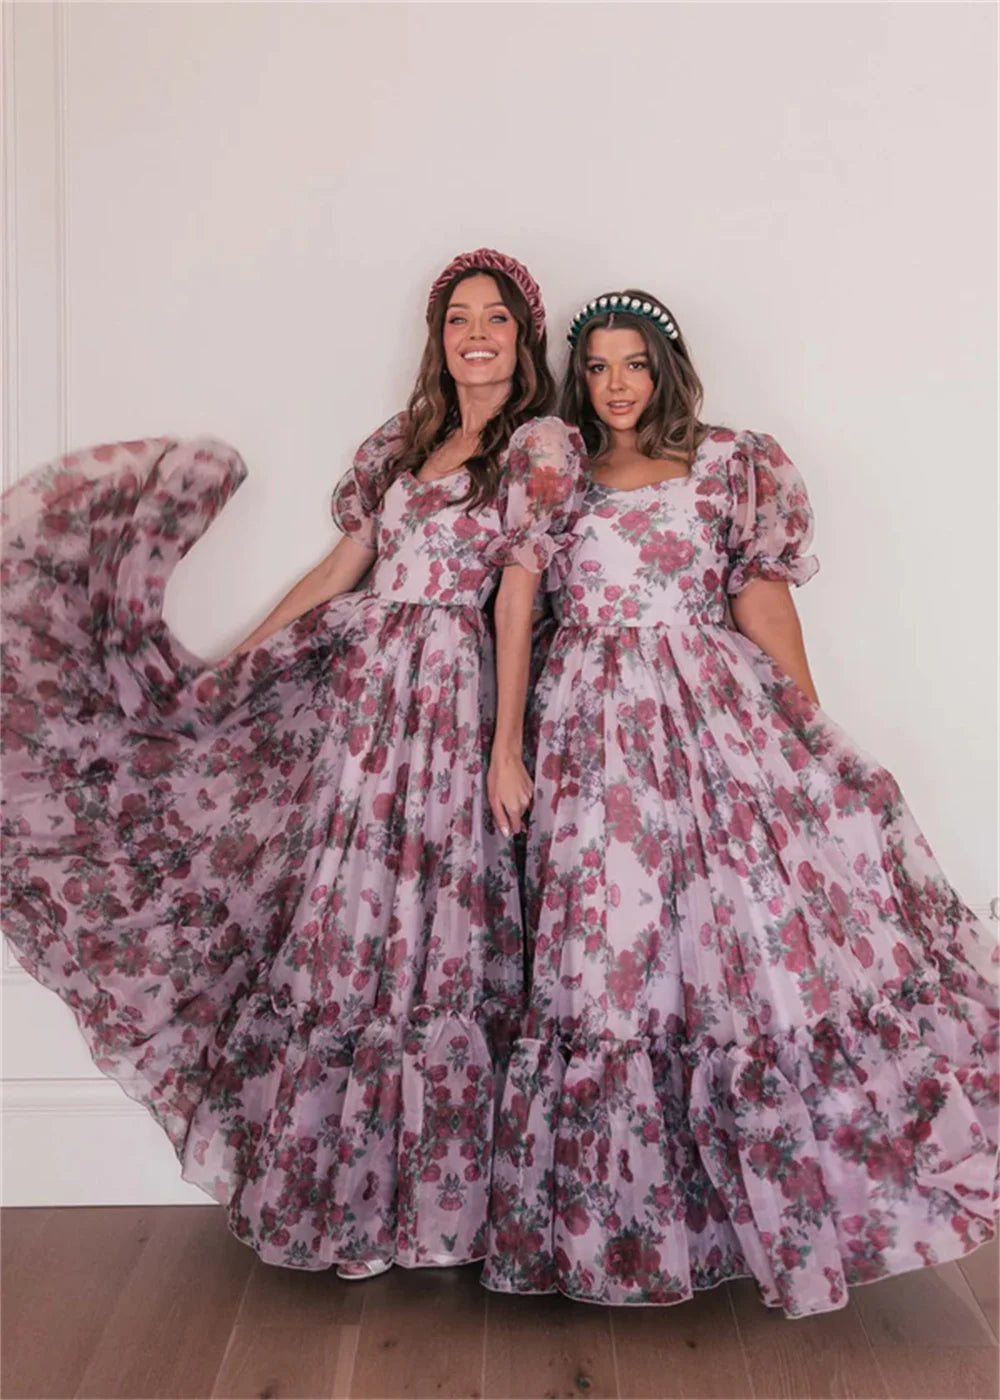 UU-Floral Print Prom Dresses A-line Organza fiesta Elegant Puffy Short Sleeves Sweep Train Lace-Up Cocktail Party